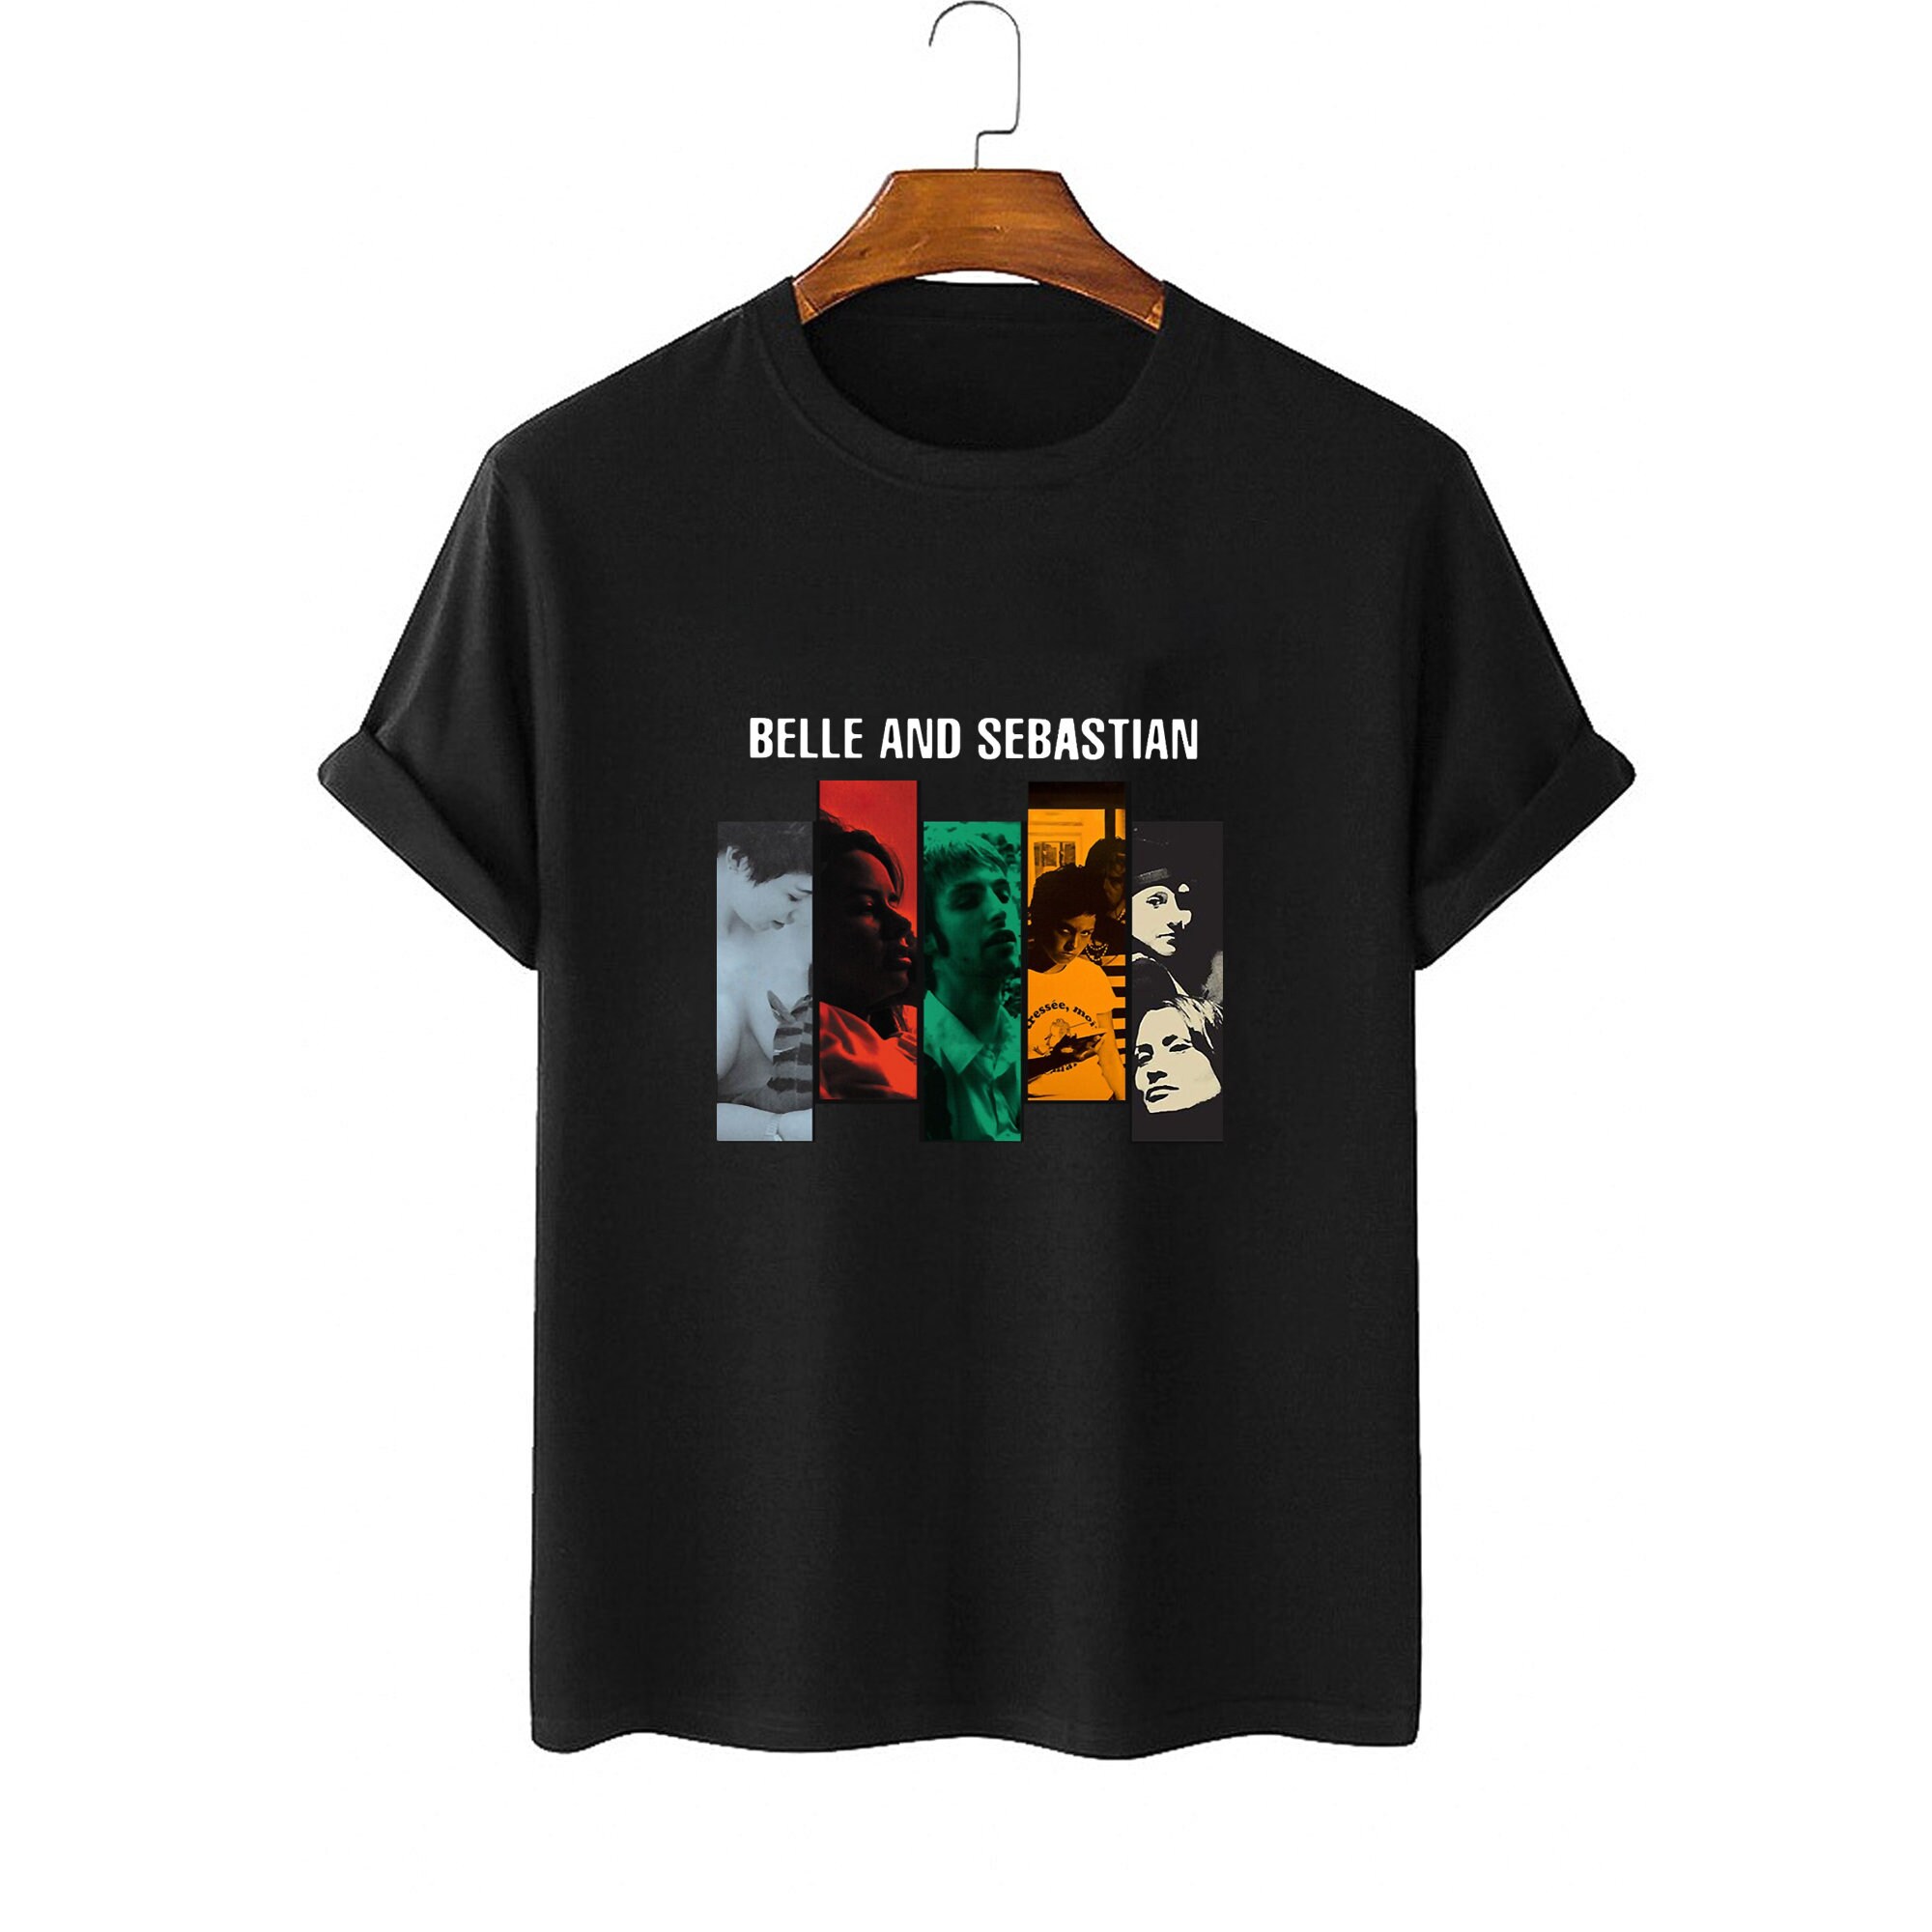 Discover Belle and Sebastian Pop Band Albums T-Shirt,Belle and Sebastian Fans Tshirt, Pop Music Lovers